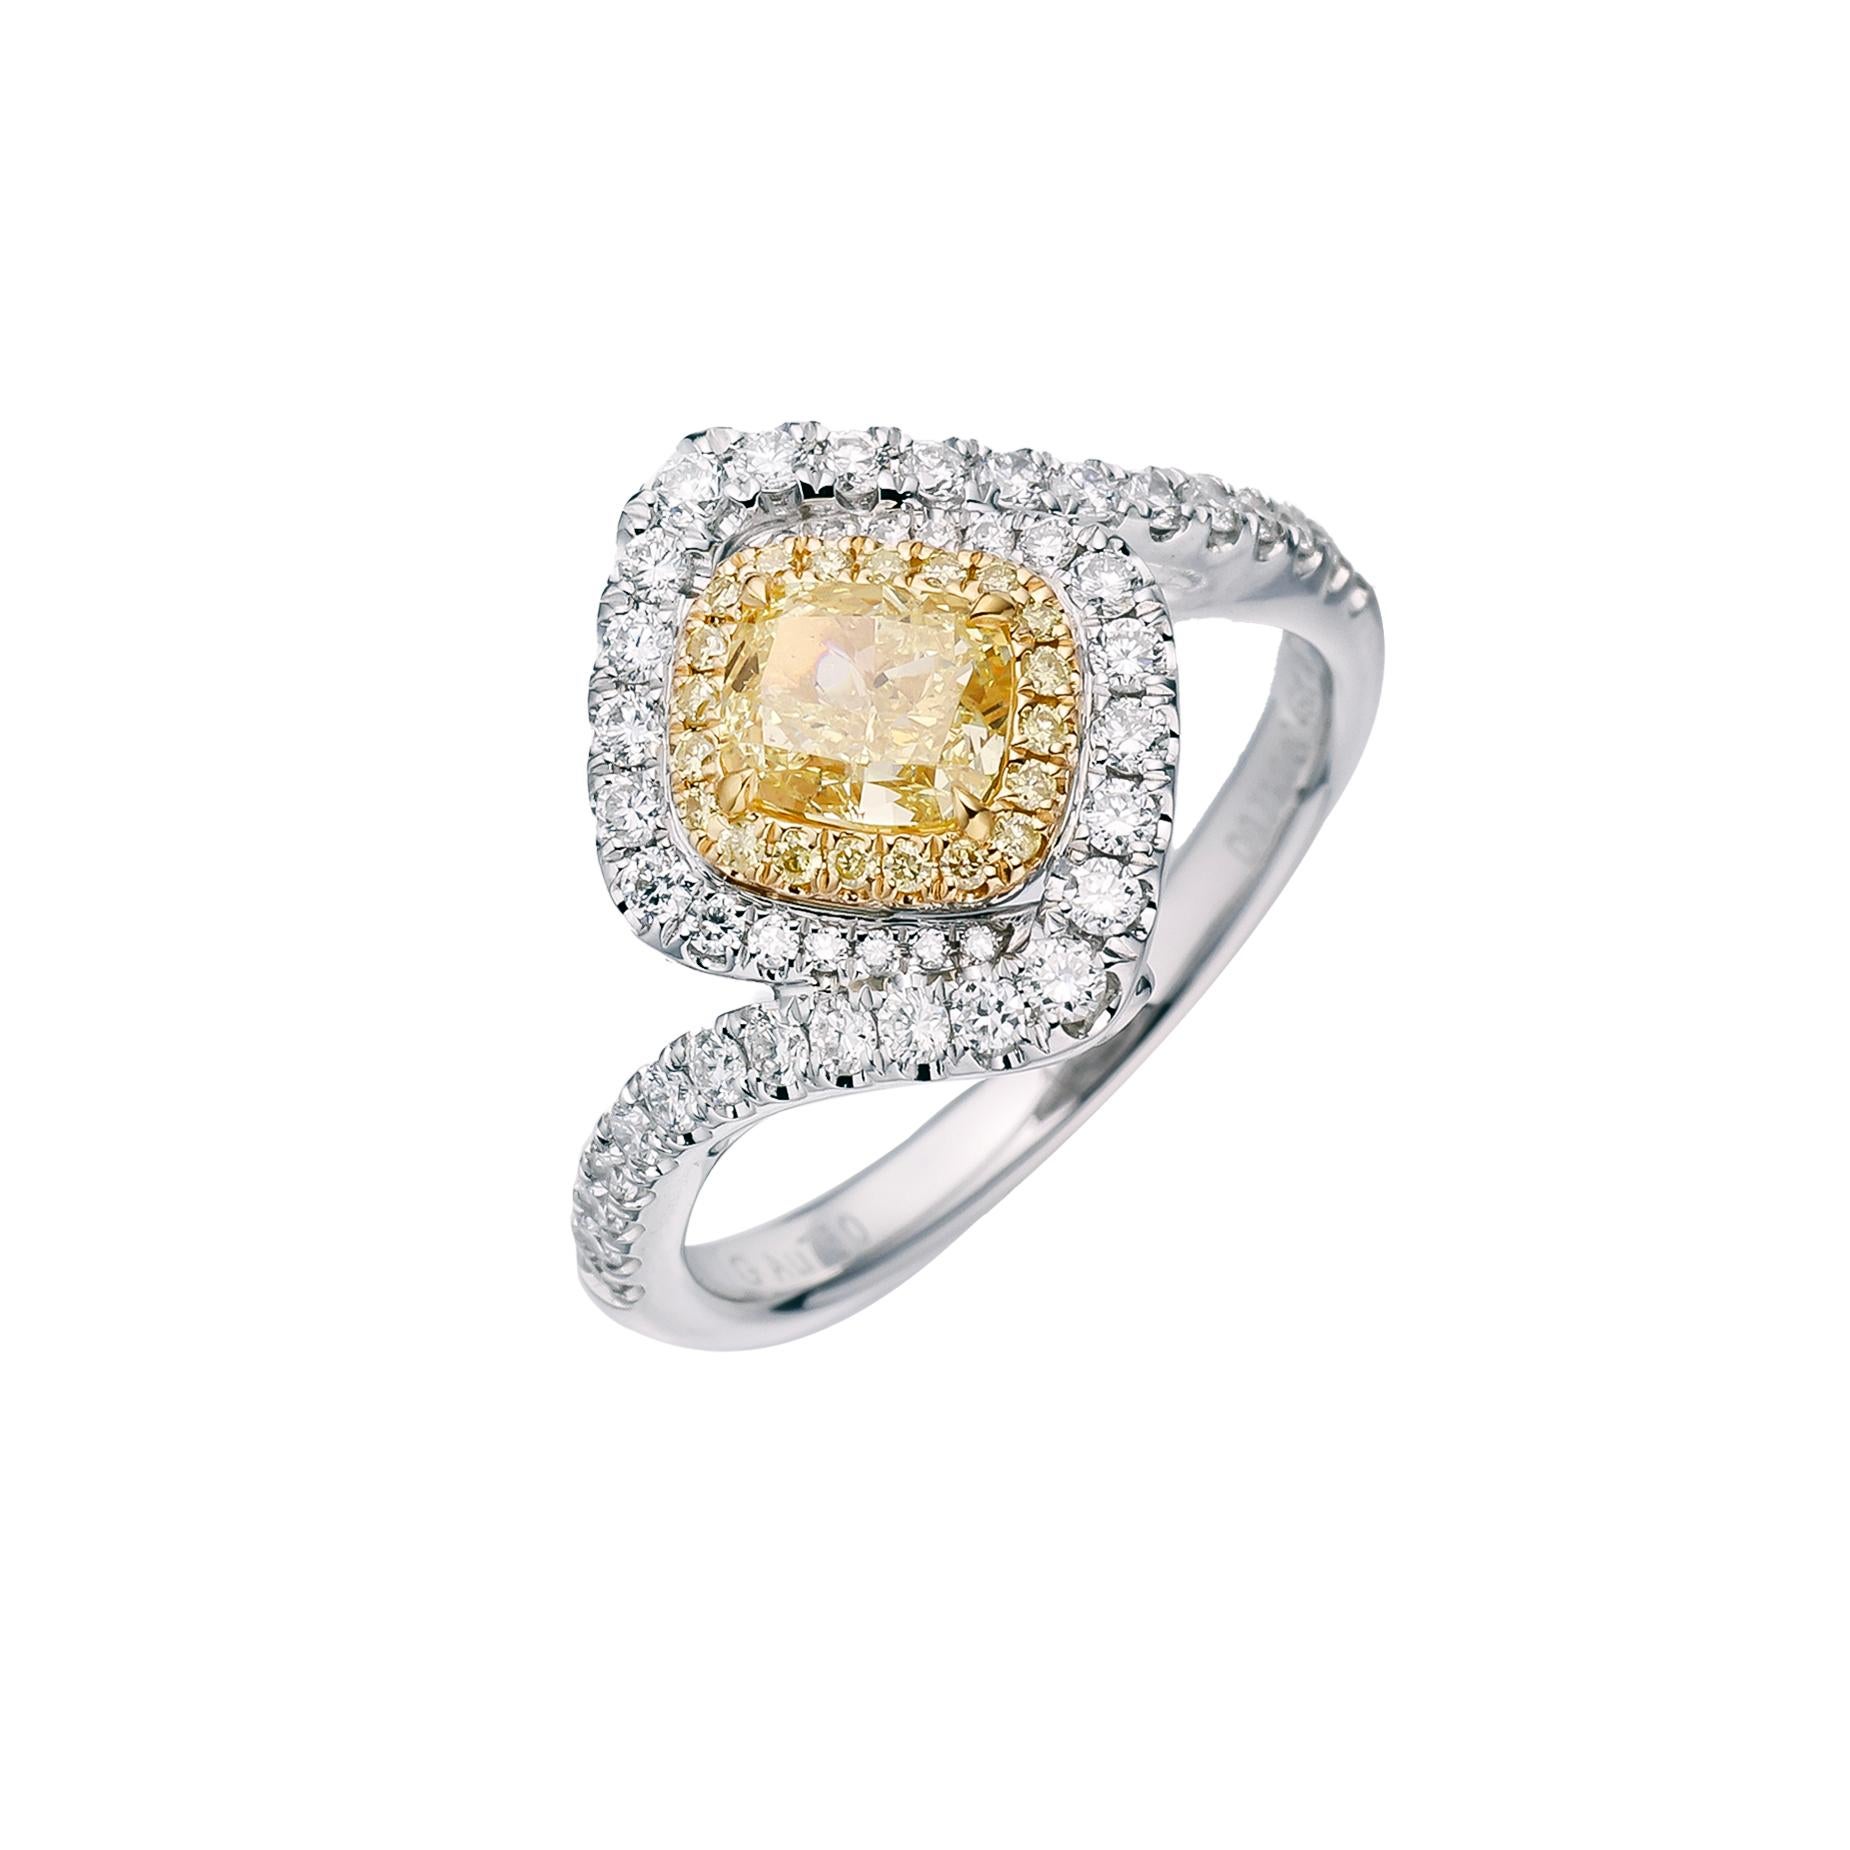 Elevate your style with a mesmerizing symbol of luxury and refinement – a GIA Certified 0.71 carat Fancy Intense Yellow Natural Cushion Cut Solitaire Diamond Ring. Crafted to perfection and set on an exquisite 18kt gold band, this ring is a true